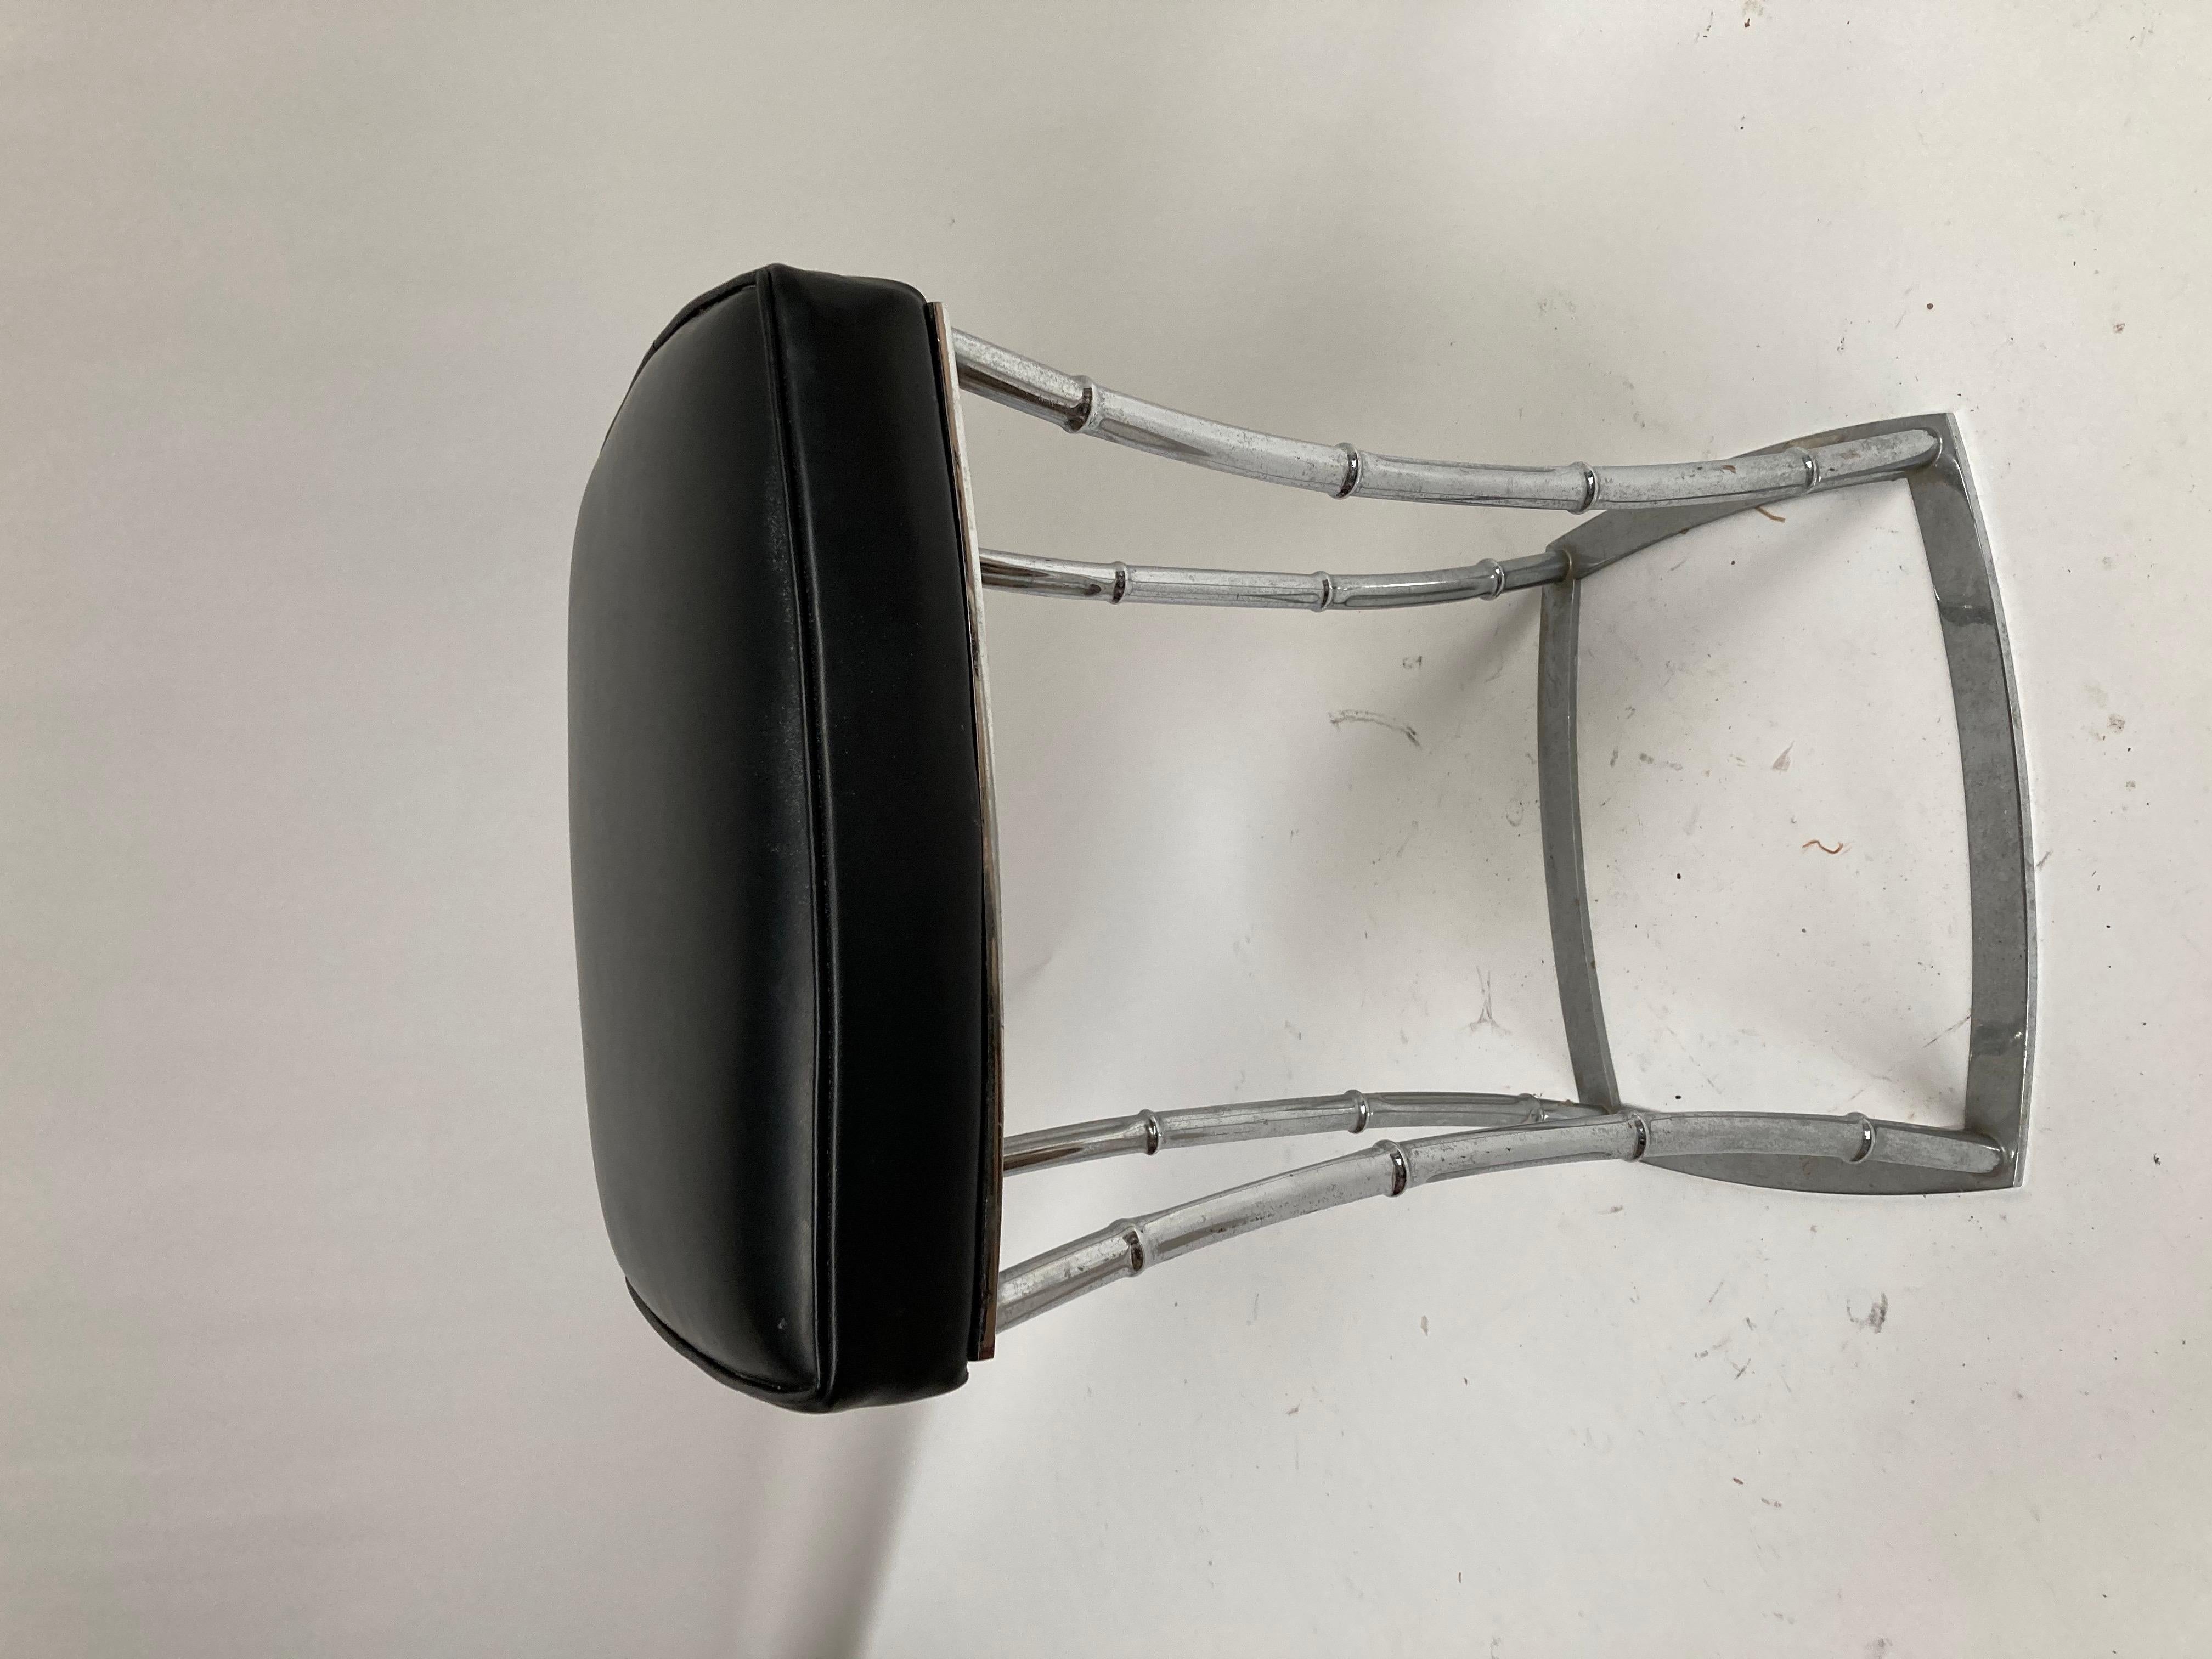 1950's stool attributed to Jacques Adnet
Black leather and chromed metal
France.